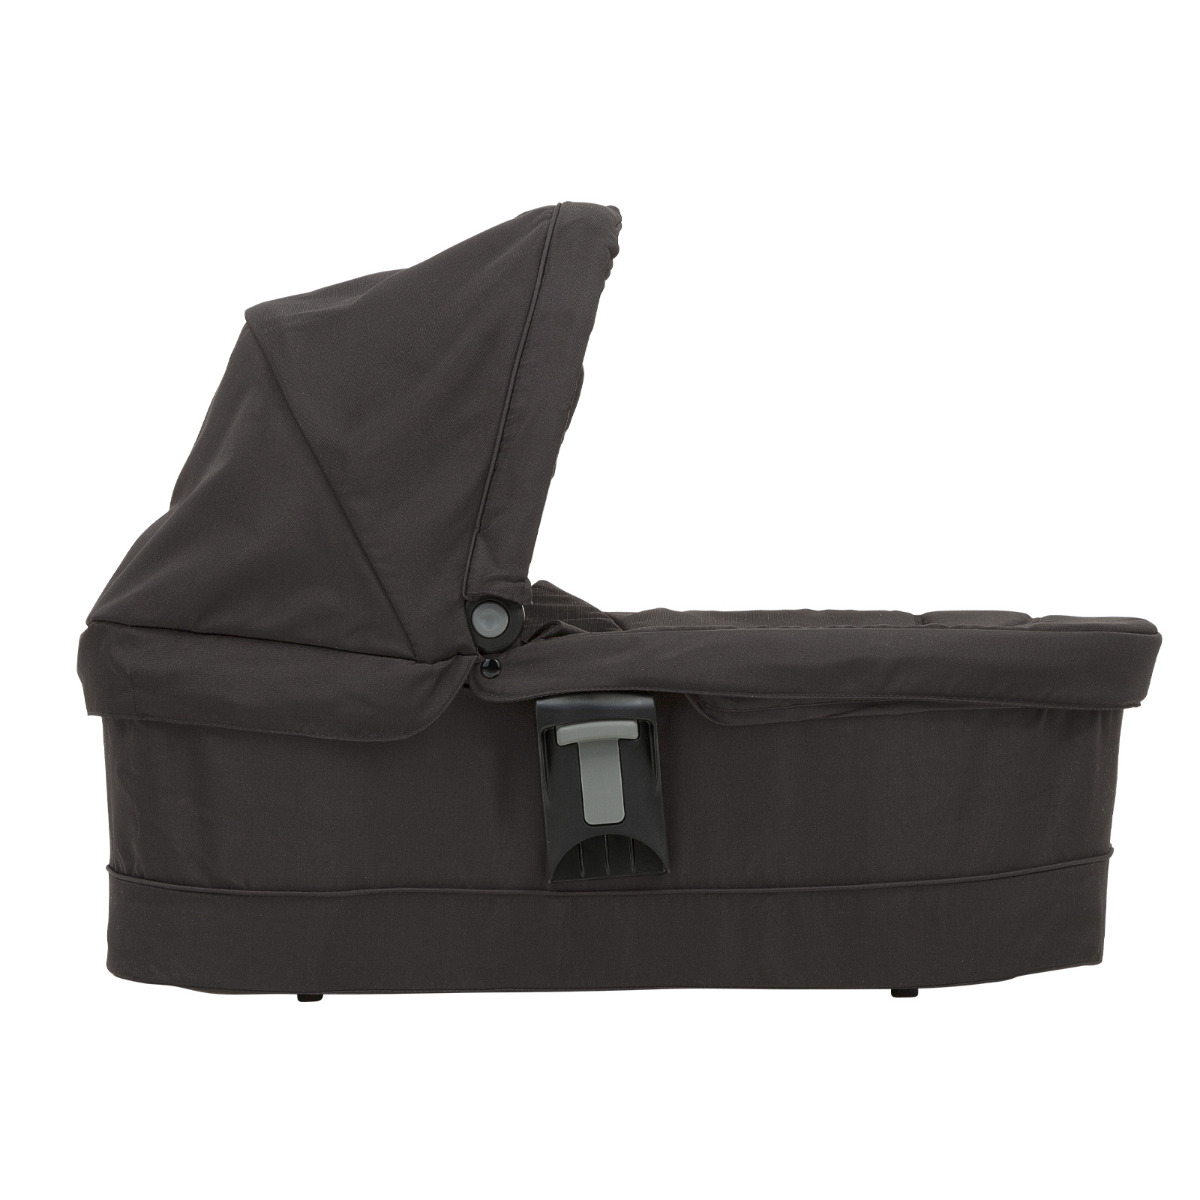 Graco® Evo® luxury carrycot with apron front angle